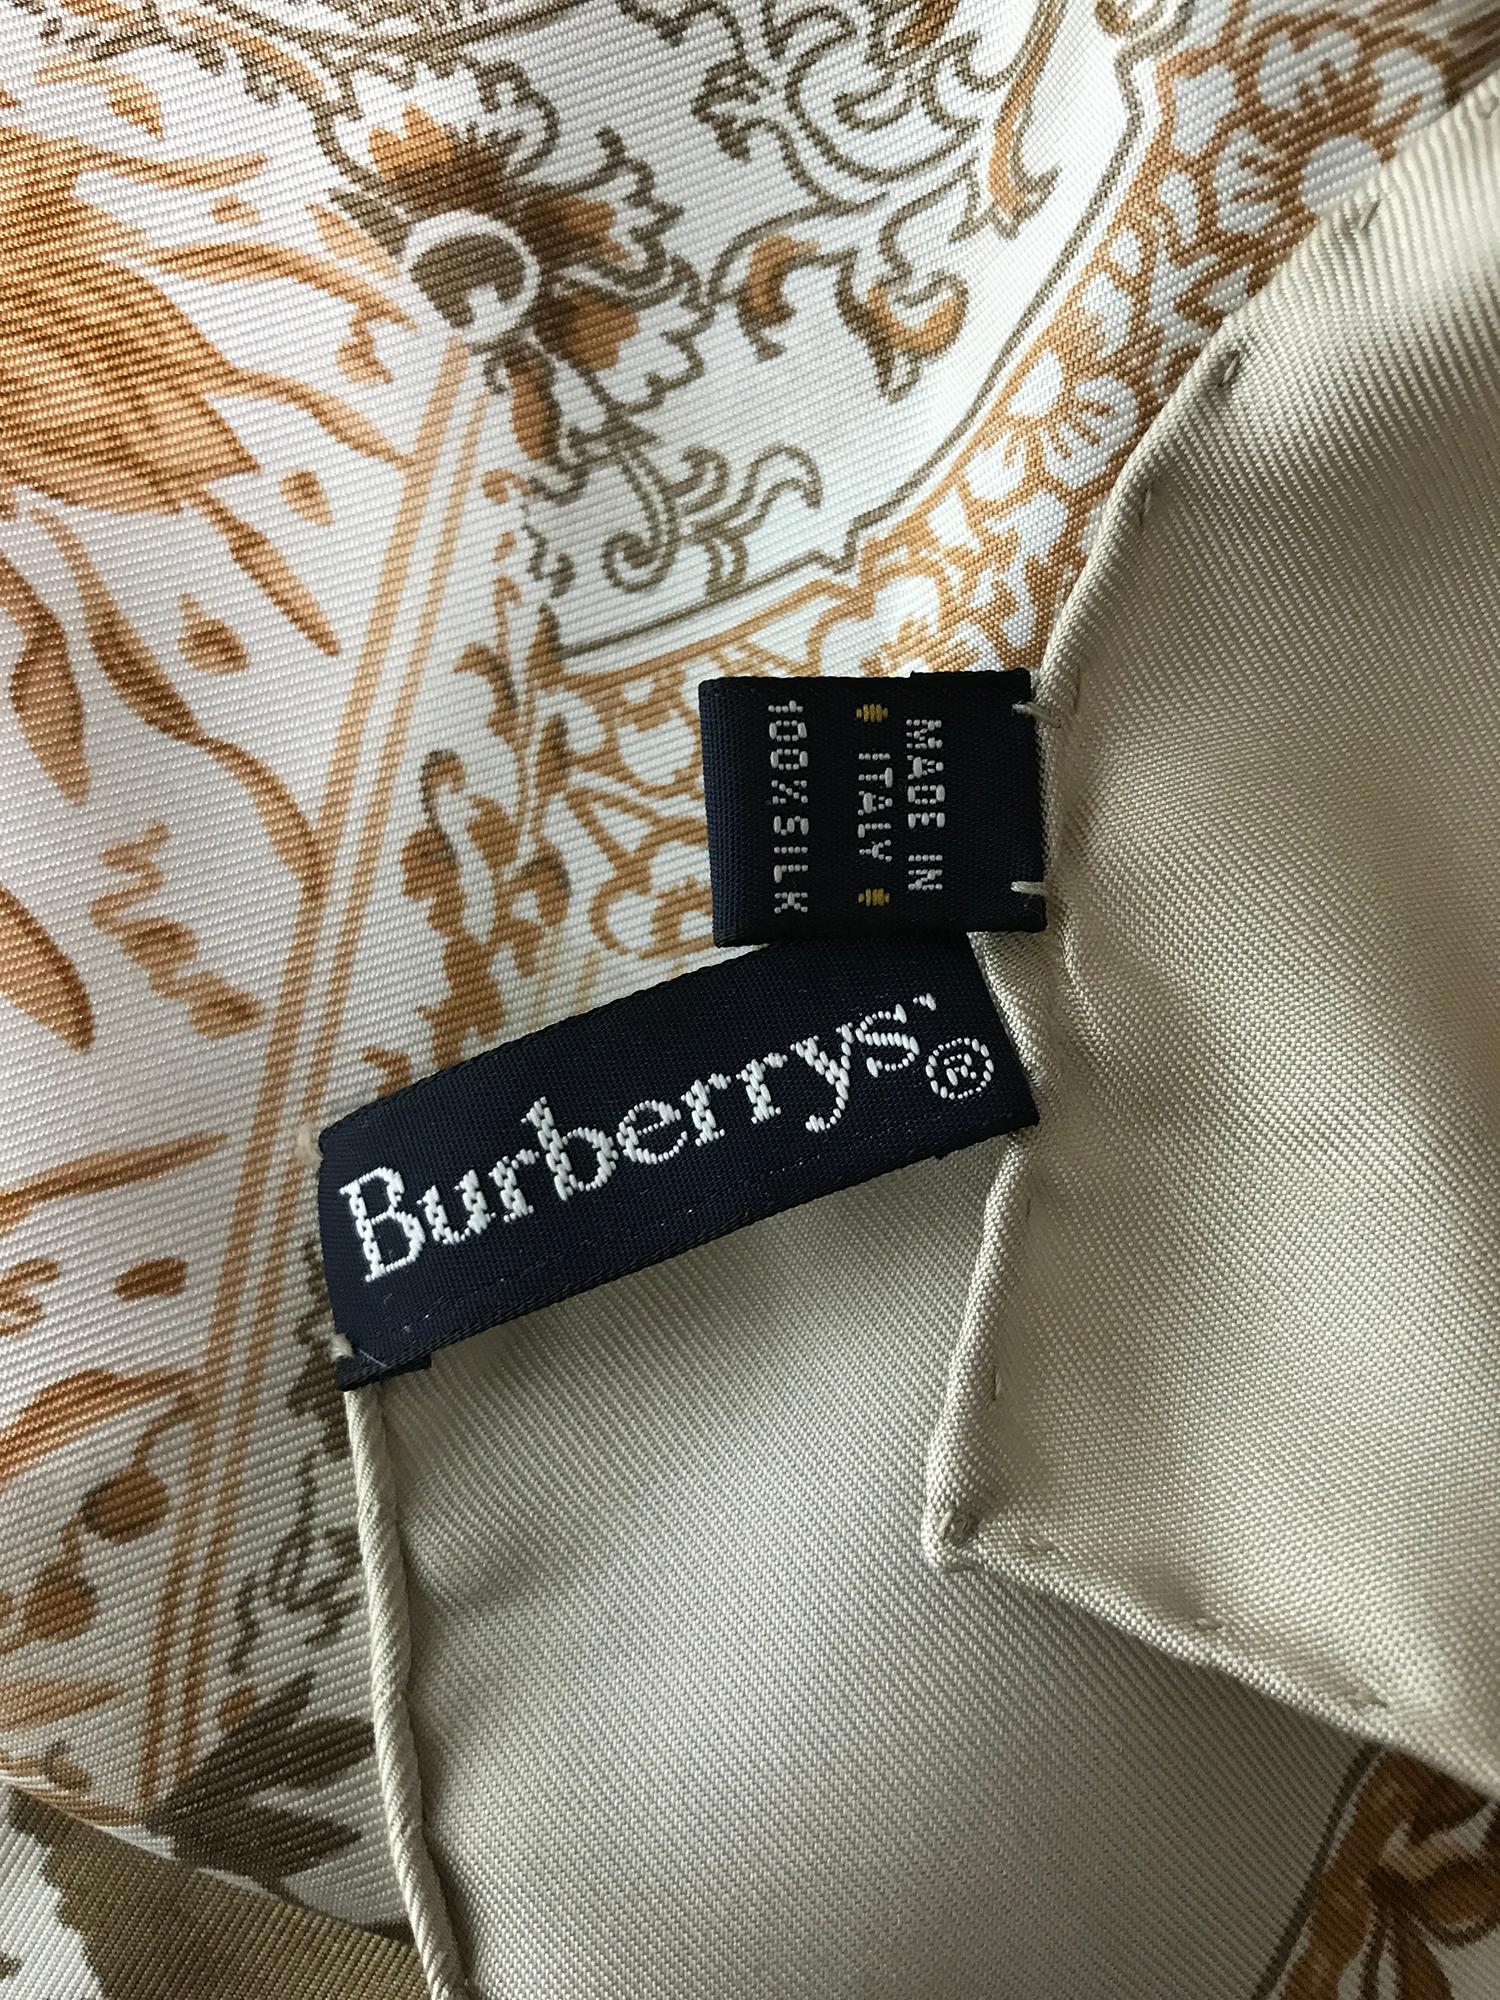 Burberry Silk Scarf Transfer-ware China Pattern in Browns and Tan In Excellent Condition For Sale In West Palm Beach, FL